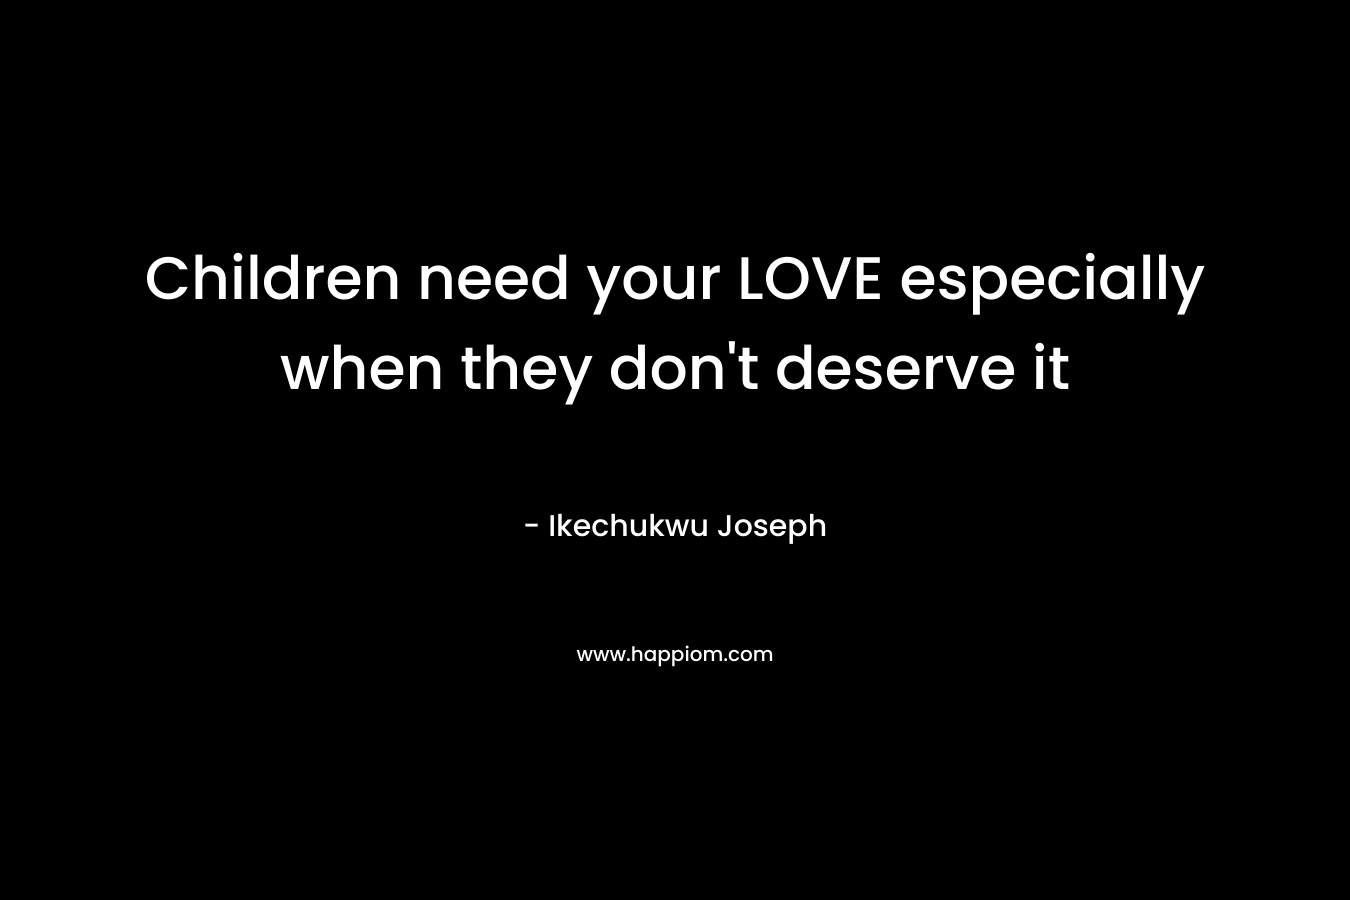 Children need your LOVE especially when they don't deserve it